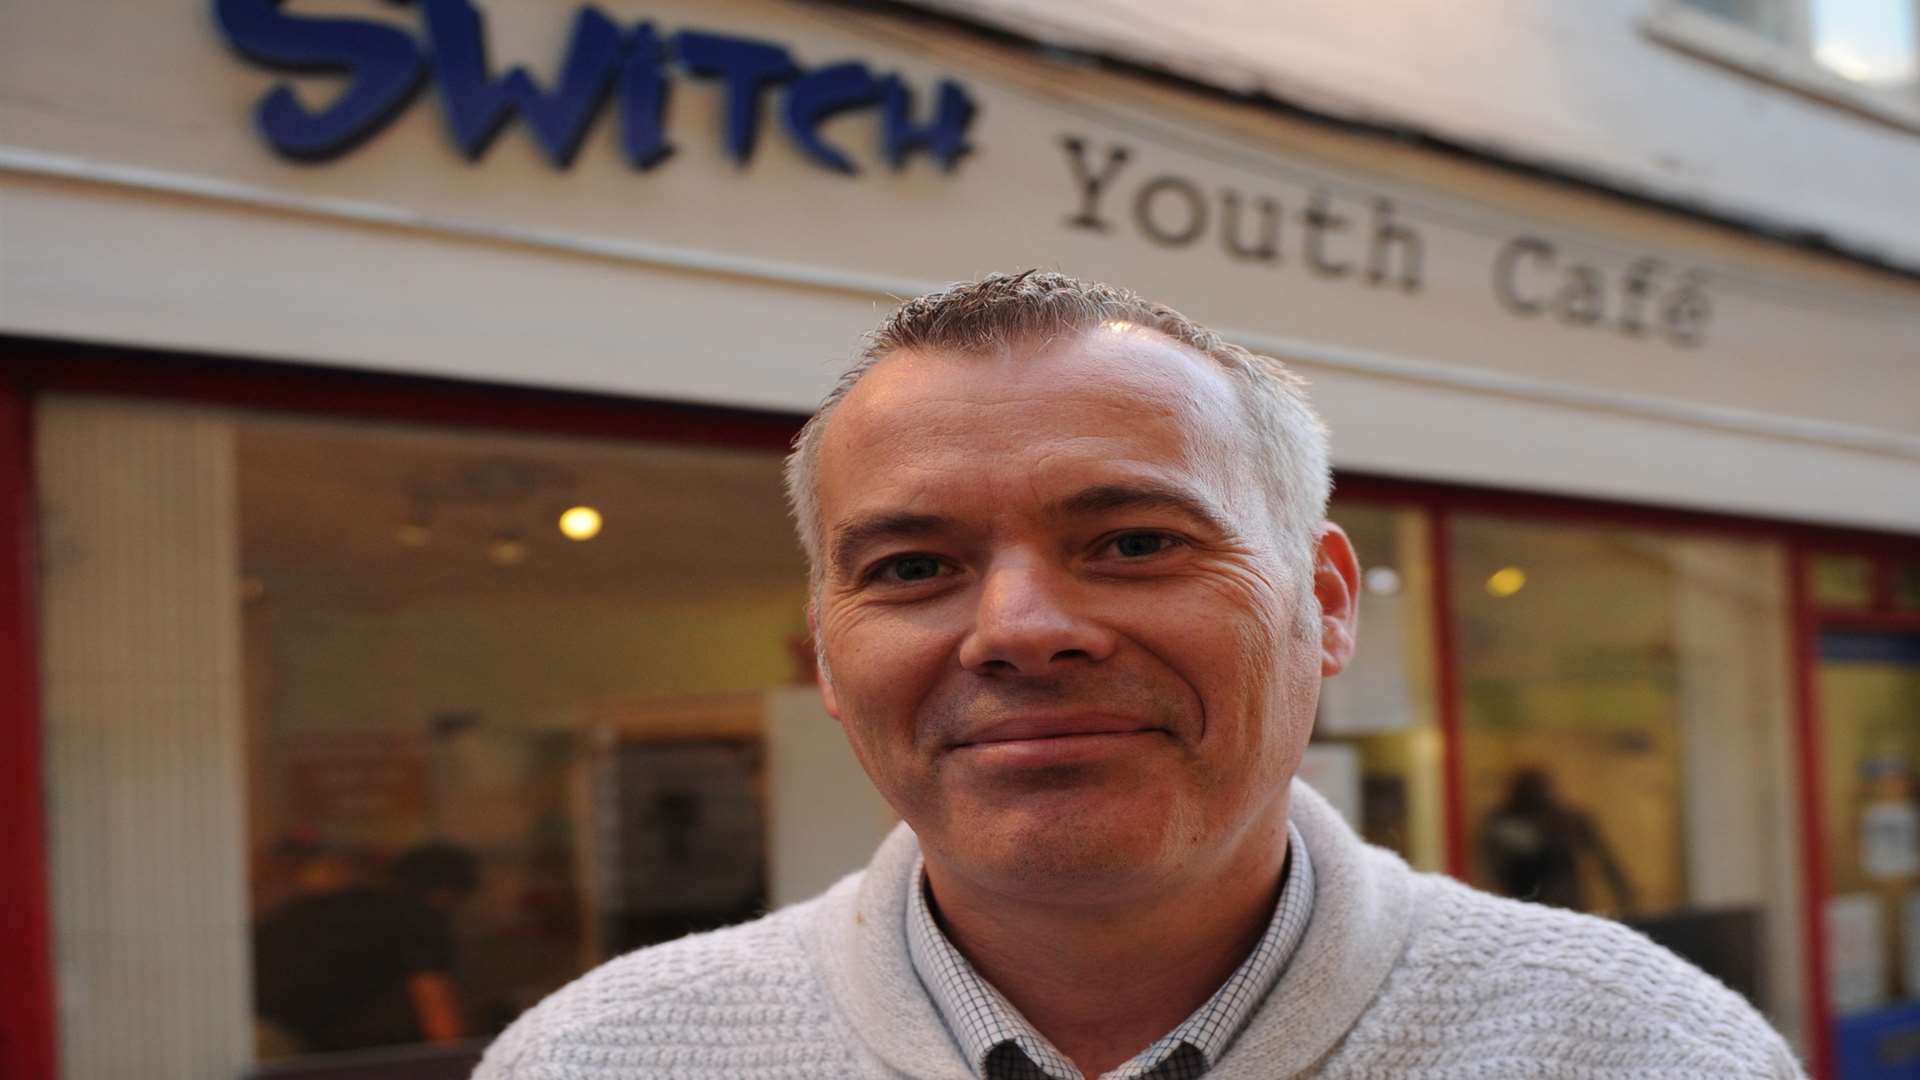 Mark Chase, manager of Switch Youth Cafe